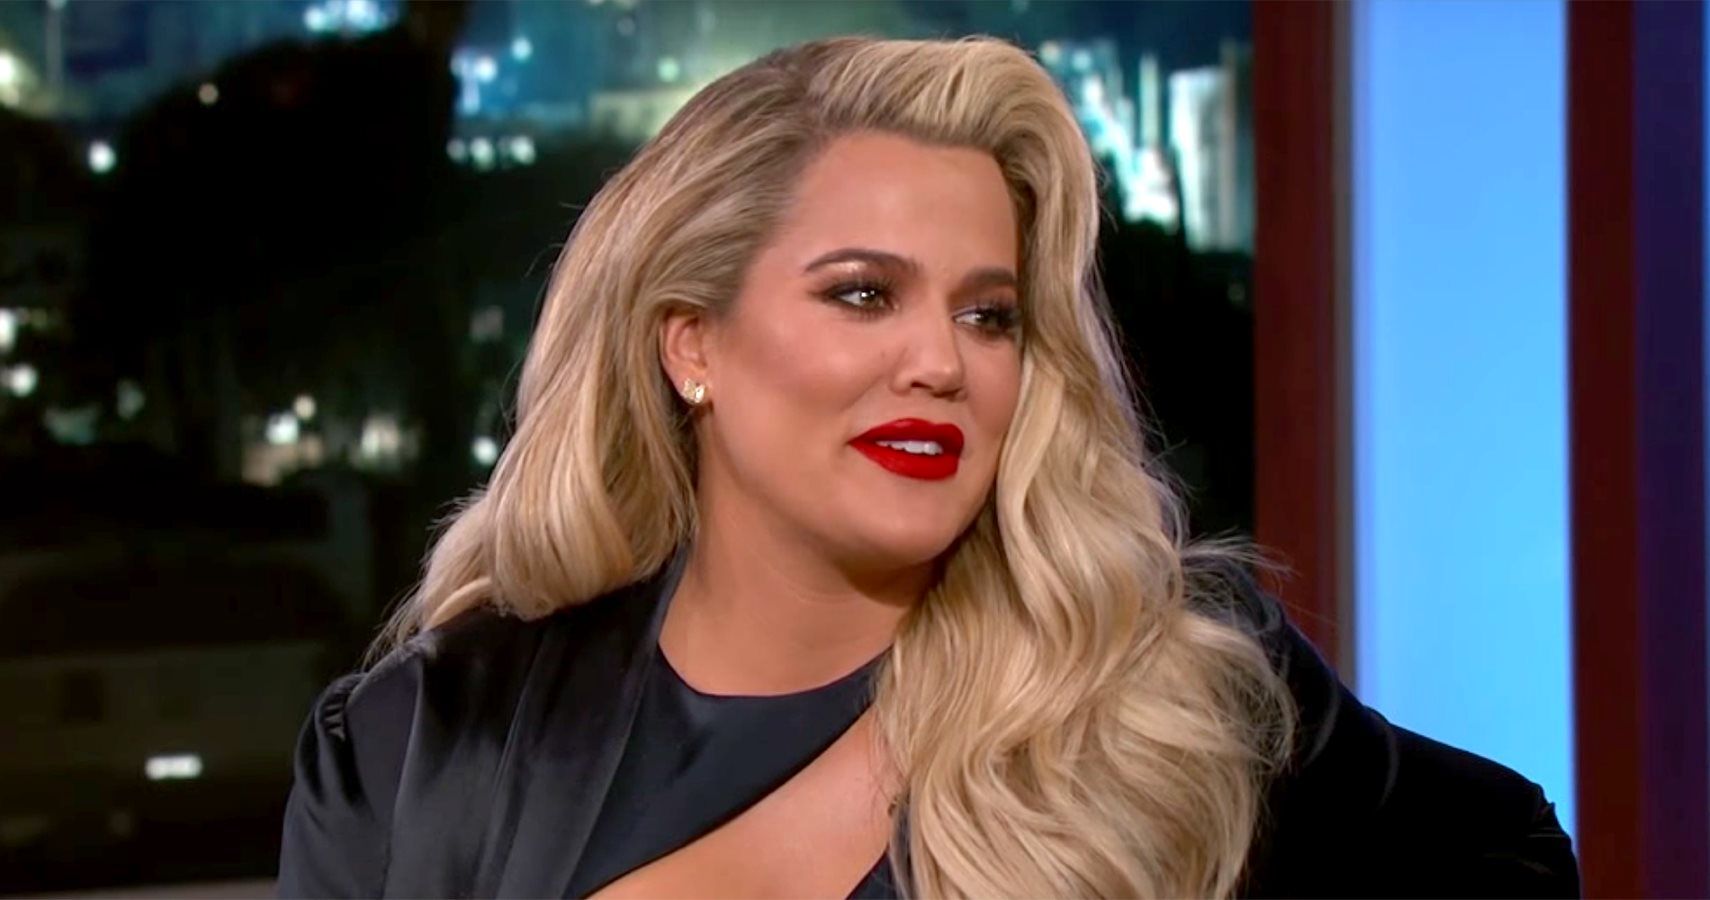 Khloe Kardashian Bares All… Or At Least Her Baby Bump